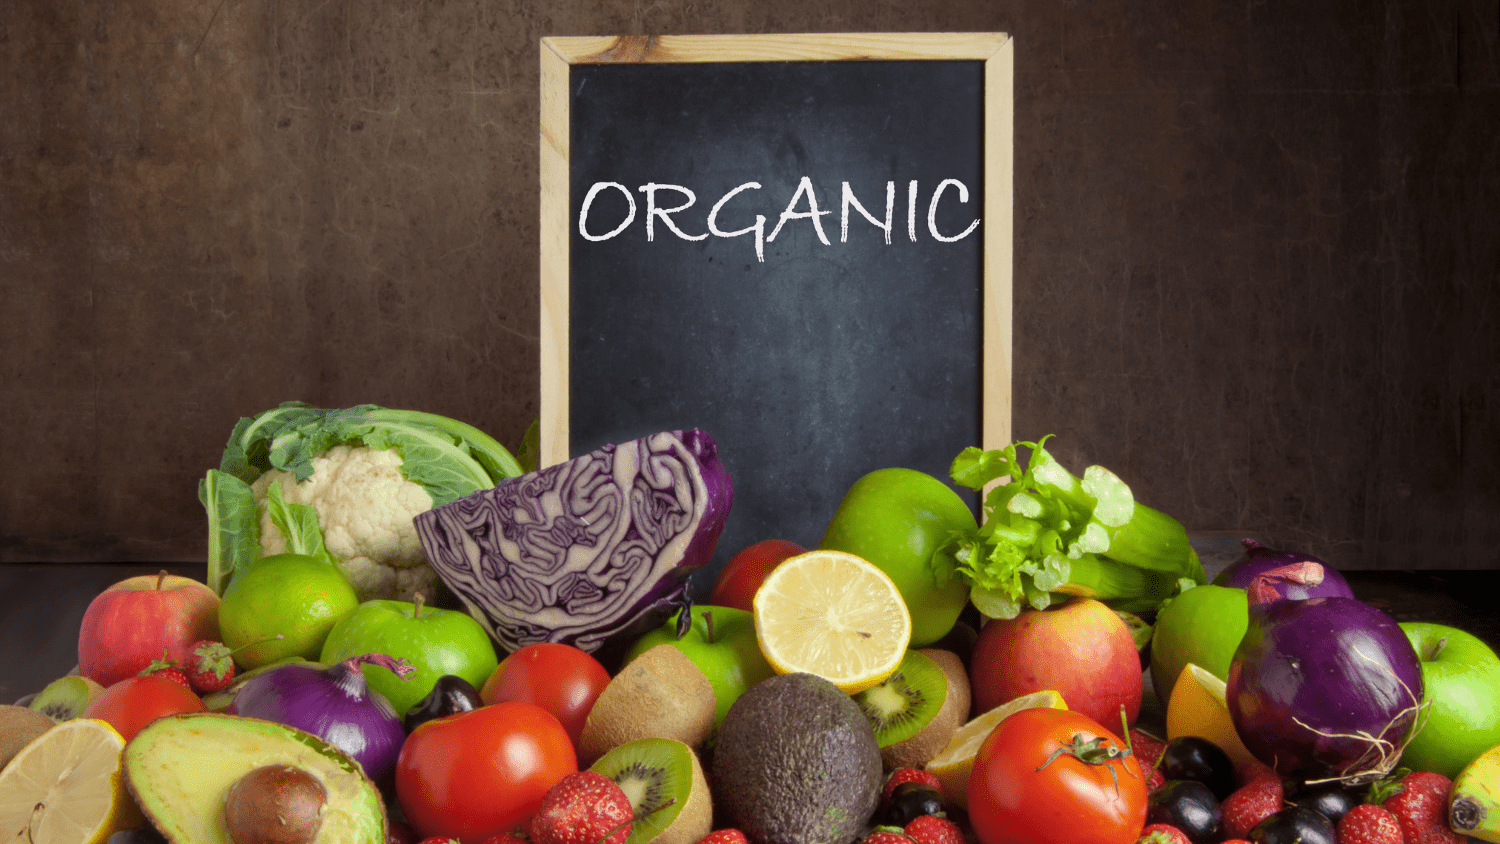 Is Organic Food Really Better?